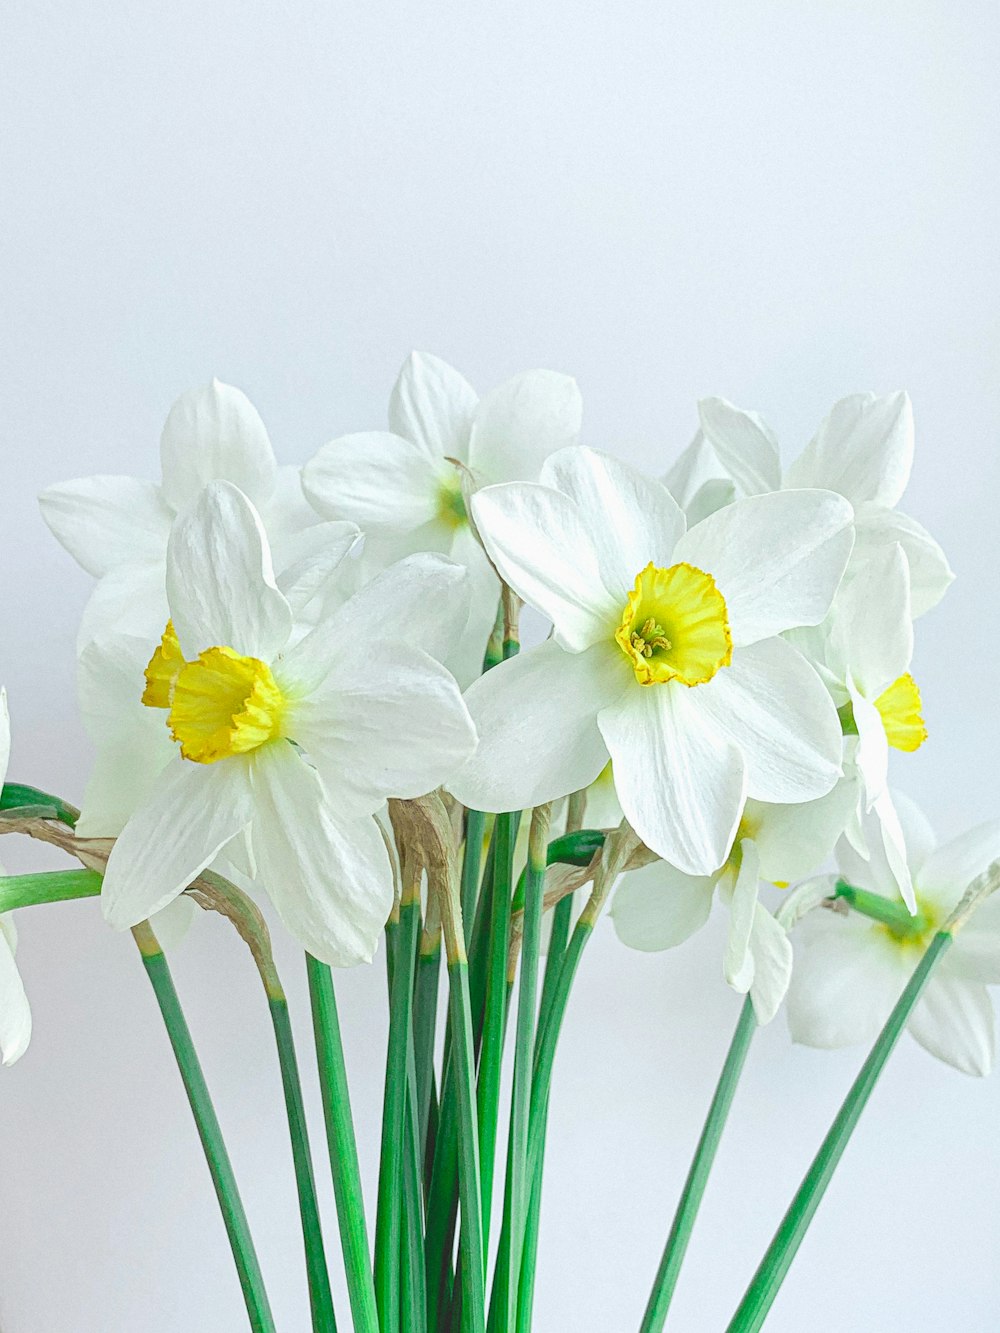 white and yellow daffodils in bloom